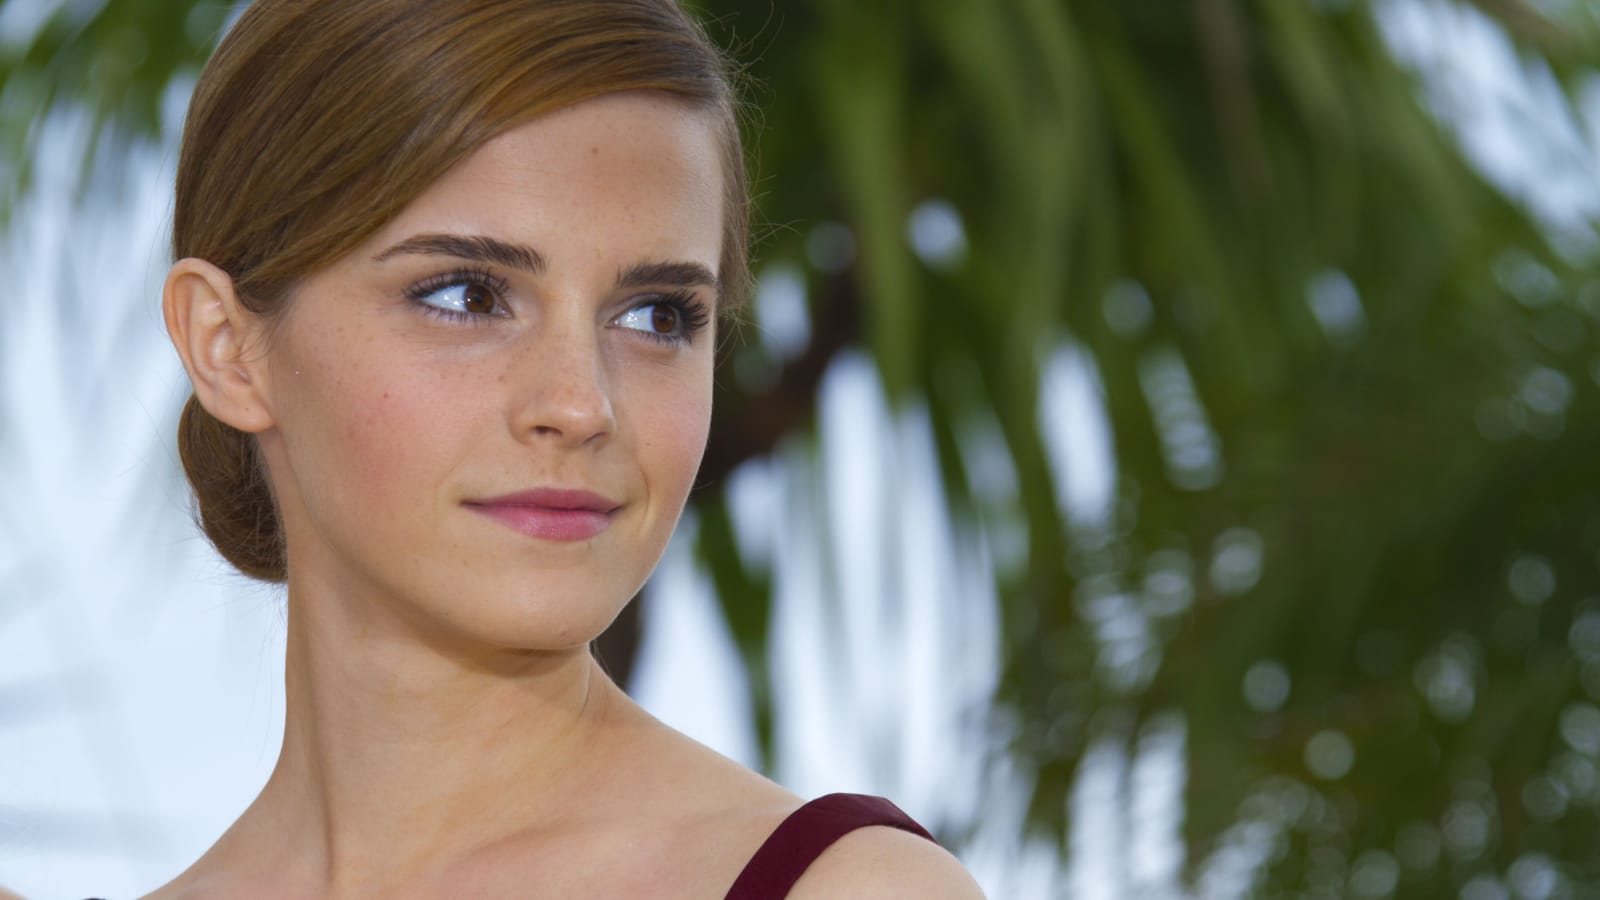 CANNES, FRANCE - MAY 16: Actress Emma Watson attends 'The Bling Ring' photocall during the 66th Cannes Film Festival at Palais des Festival on May 16, 2013 in Cannes, France.